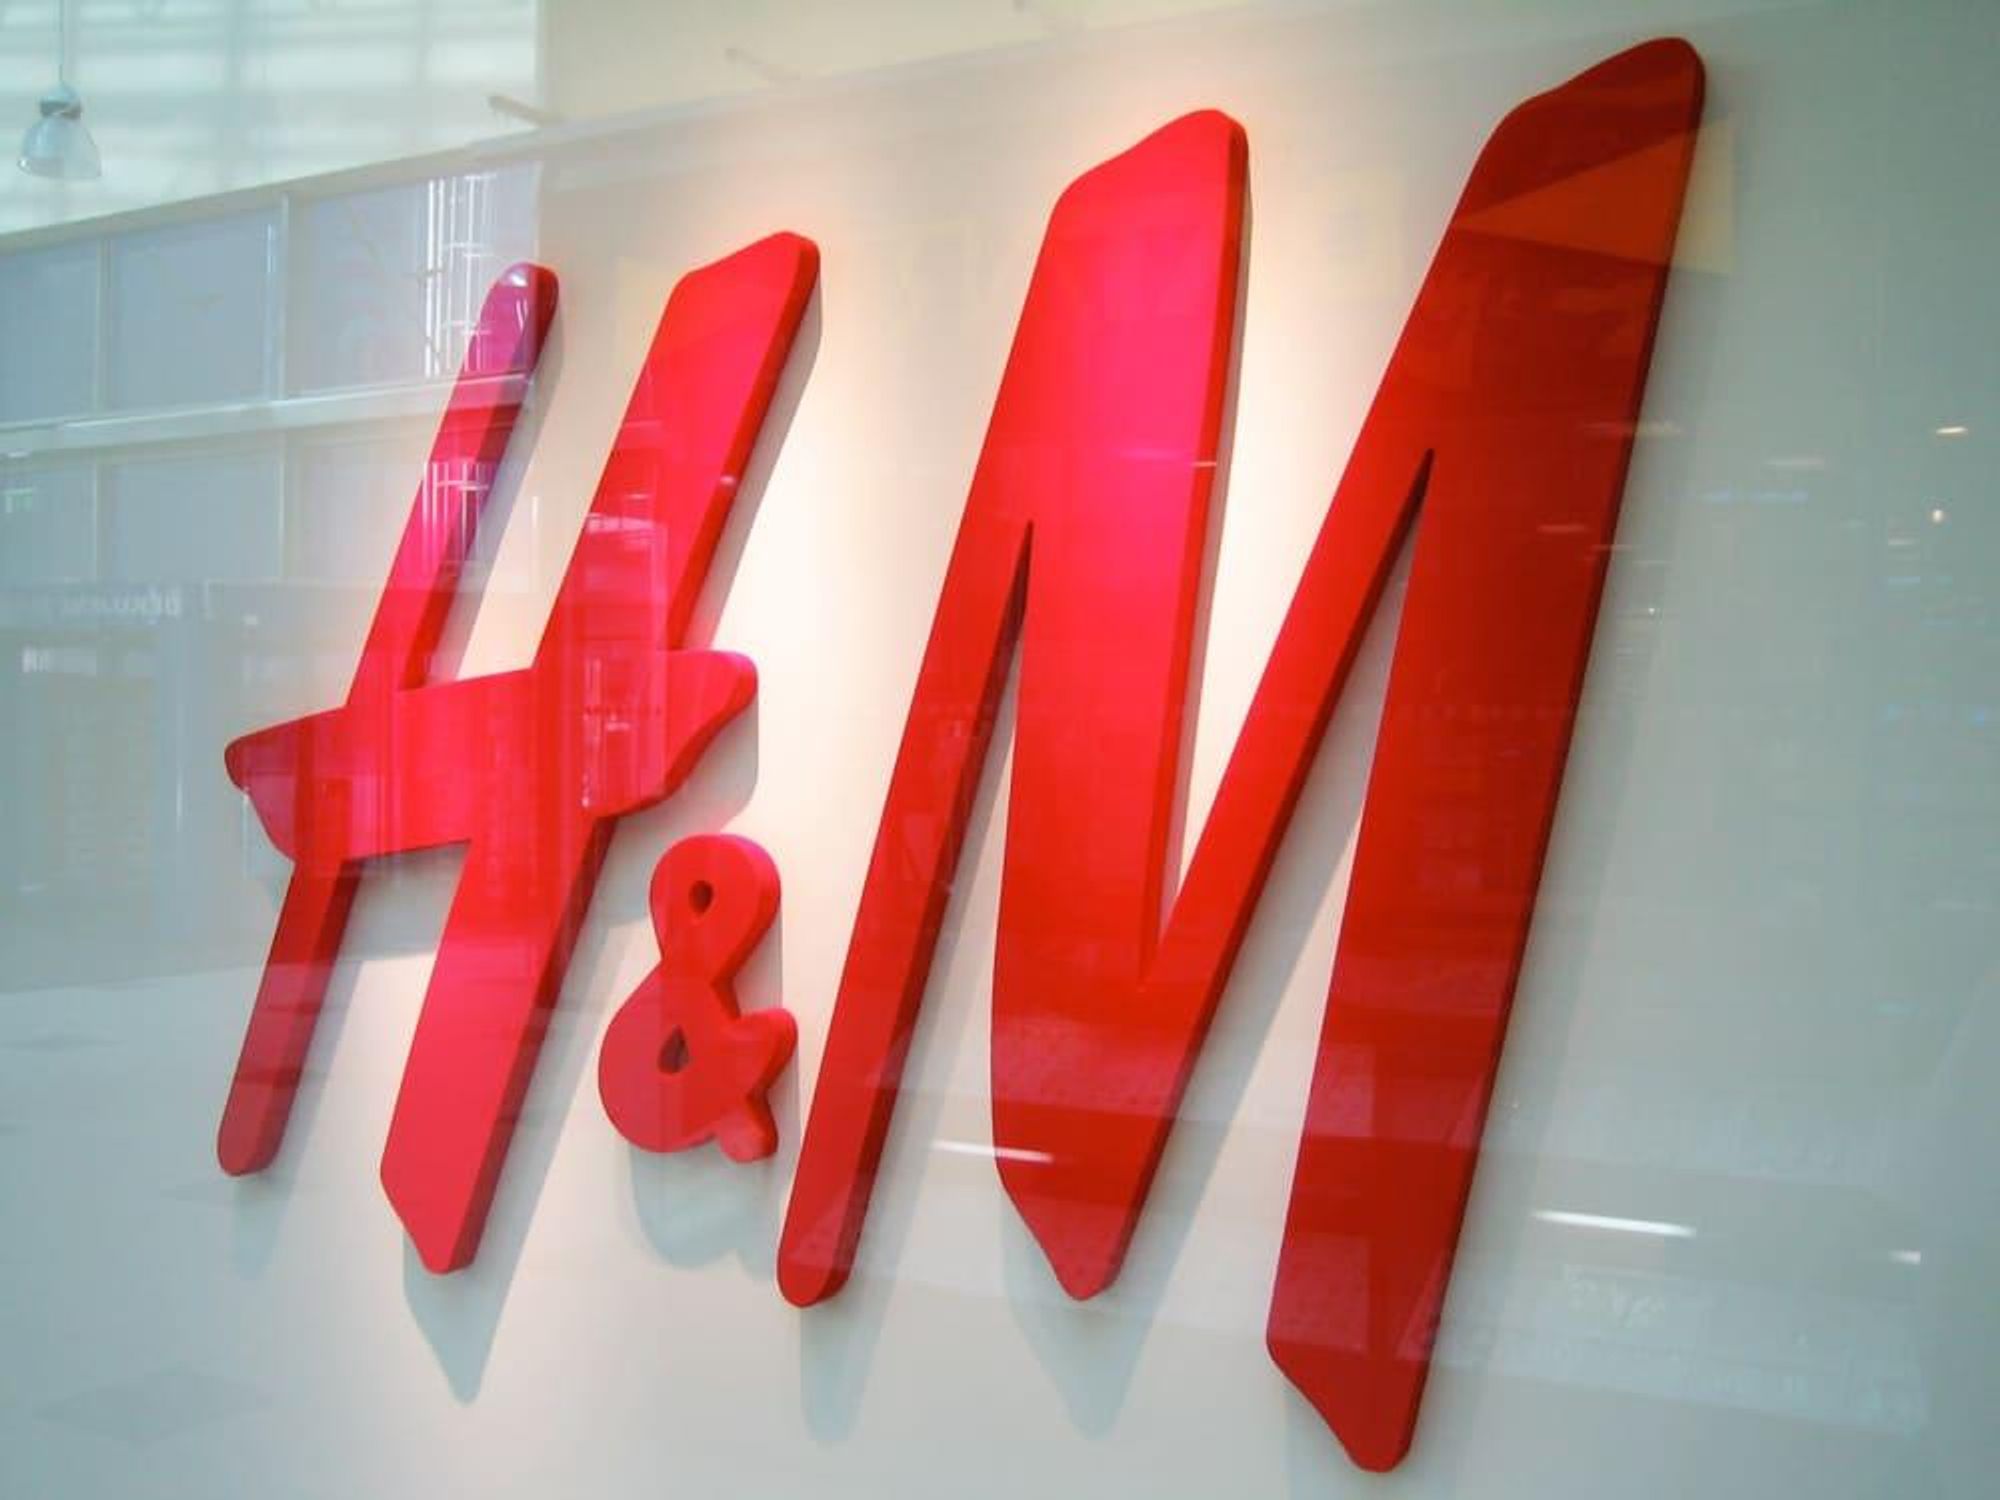 H&M store sign in store window